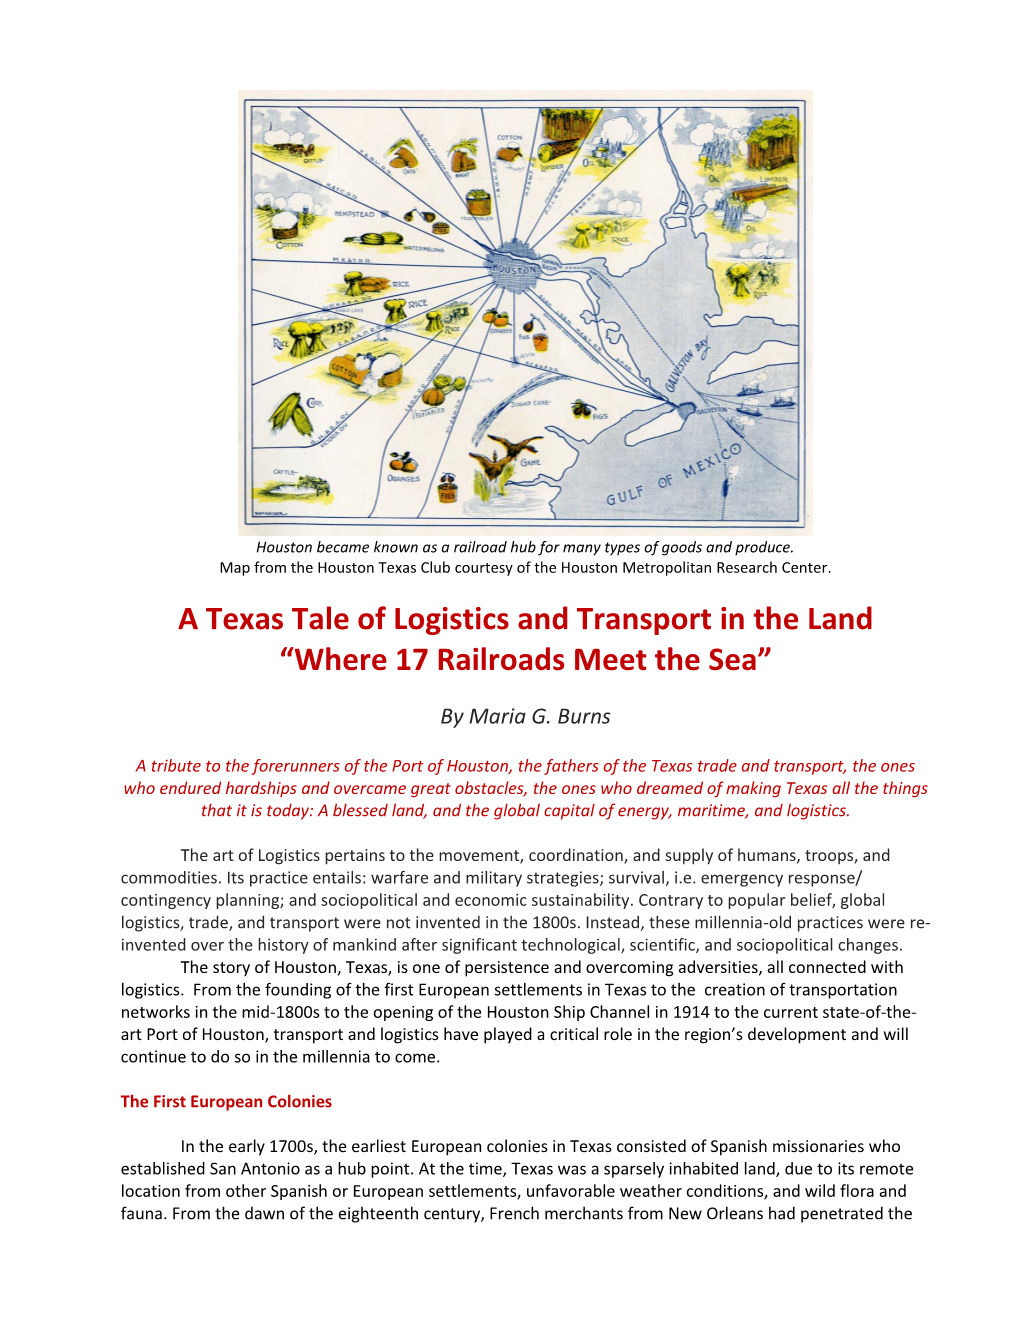 A Texas Tale of Logistics and Transport in the Land 'Where 17